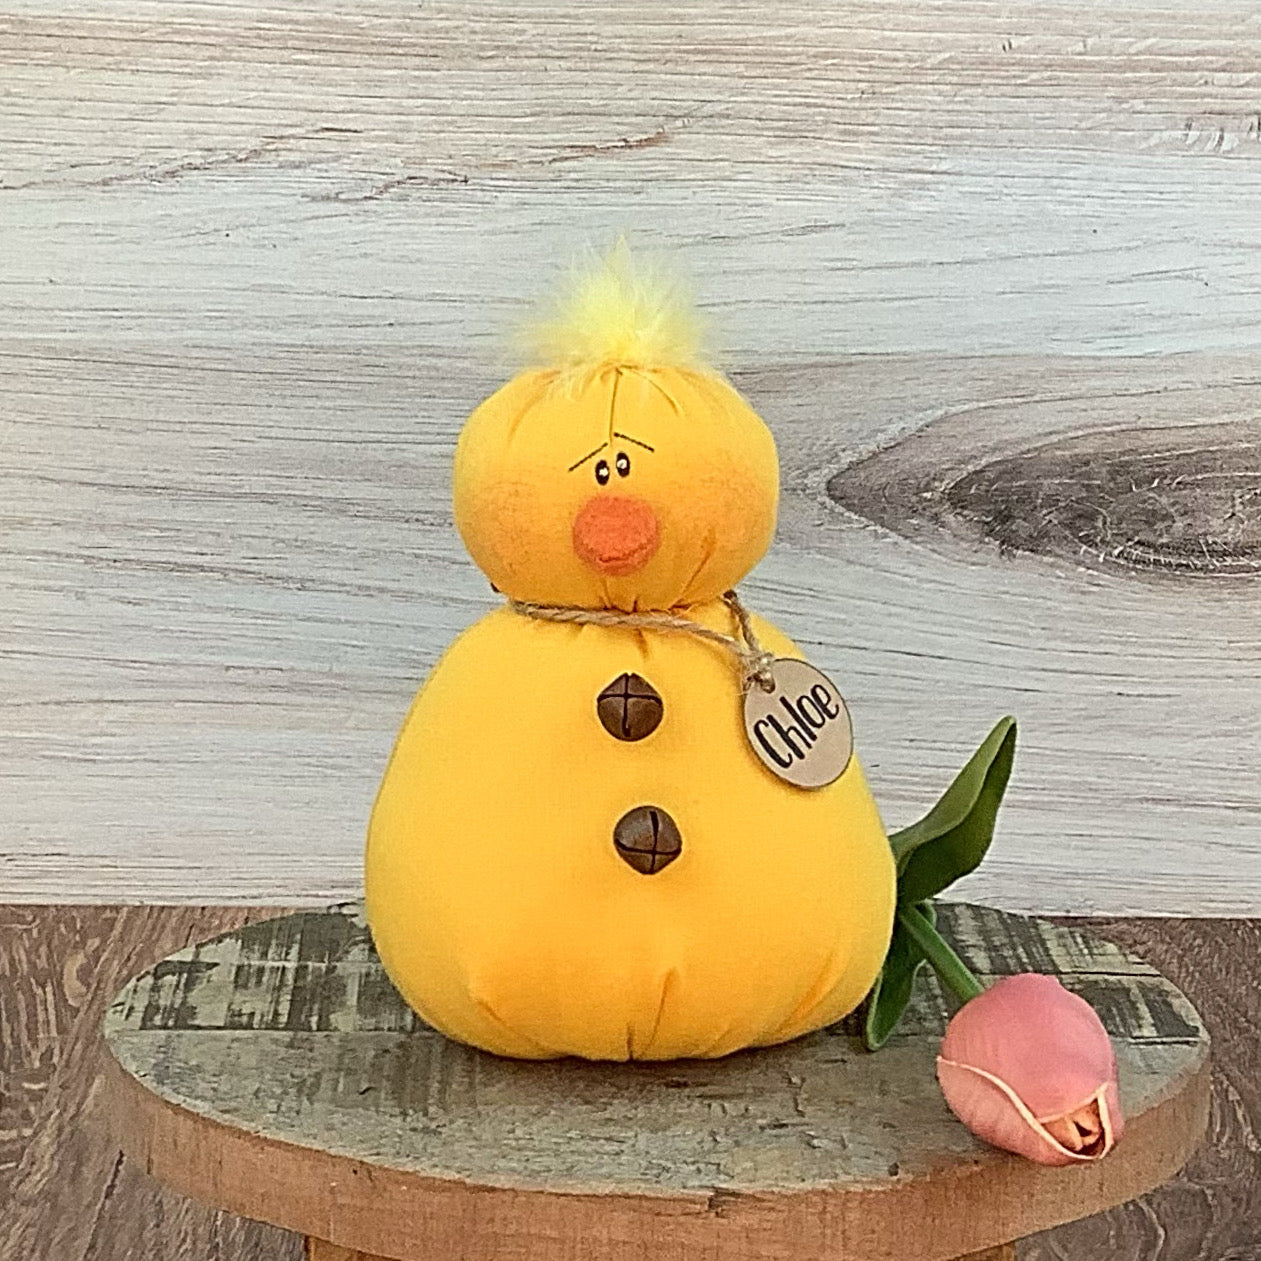 Chloe the Chicklet - Whimsical Primitive Textile Art: Handmade Soft Sculpture Collectible Baby Chick by Honey and Me, Inc™